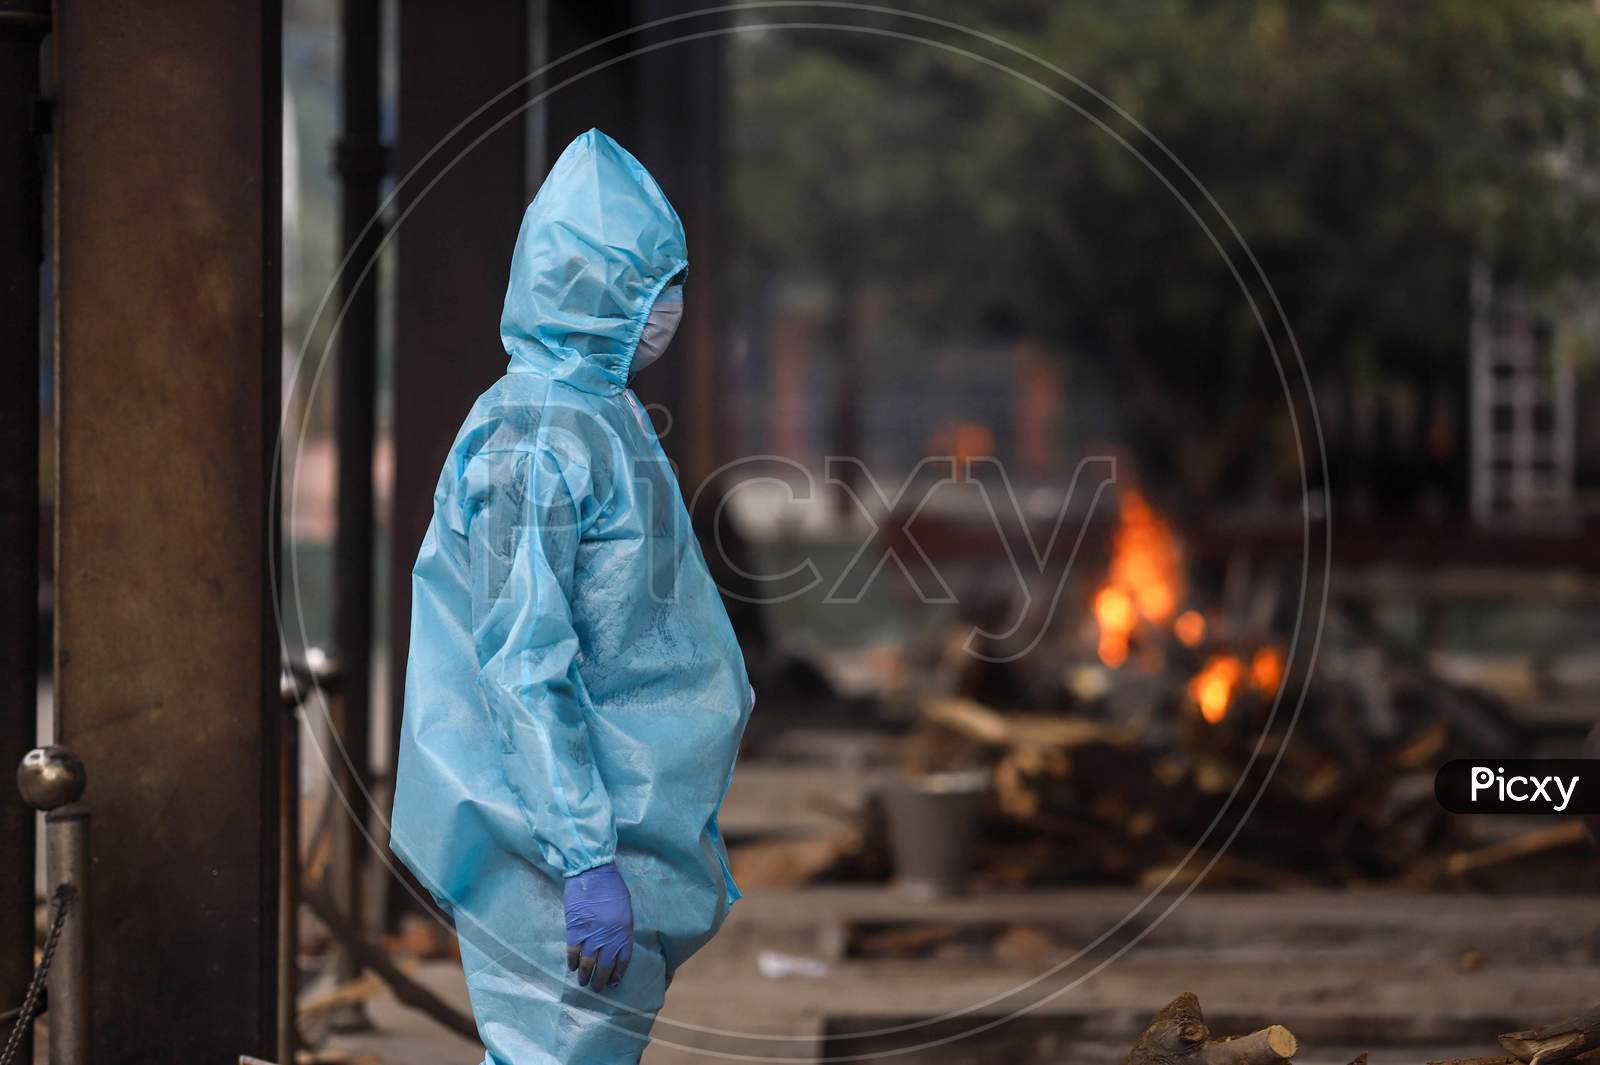 A Relative Of The Deceased Covid-19 patient Wear Hazmat Suits to Perform The Last Rites At Nigambodh Ghat, On May 31, 2020 In New Delhi, India.